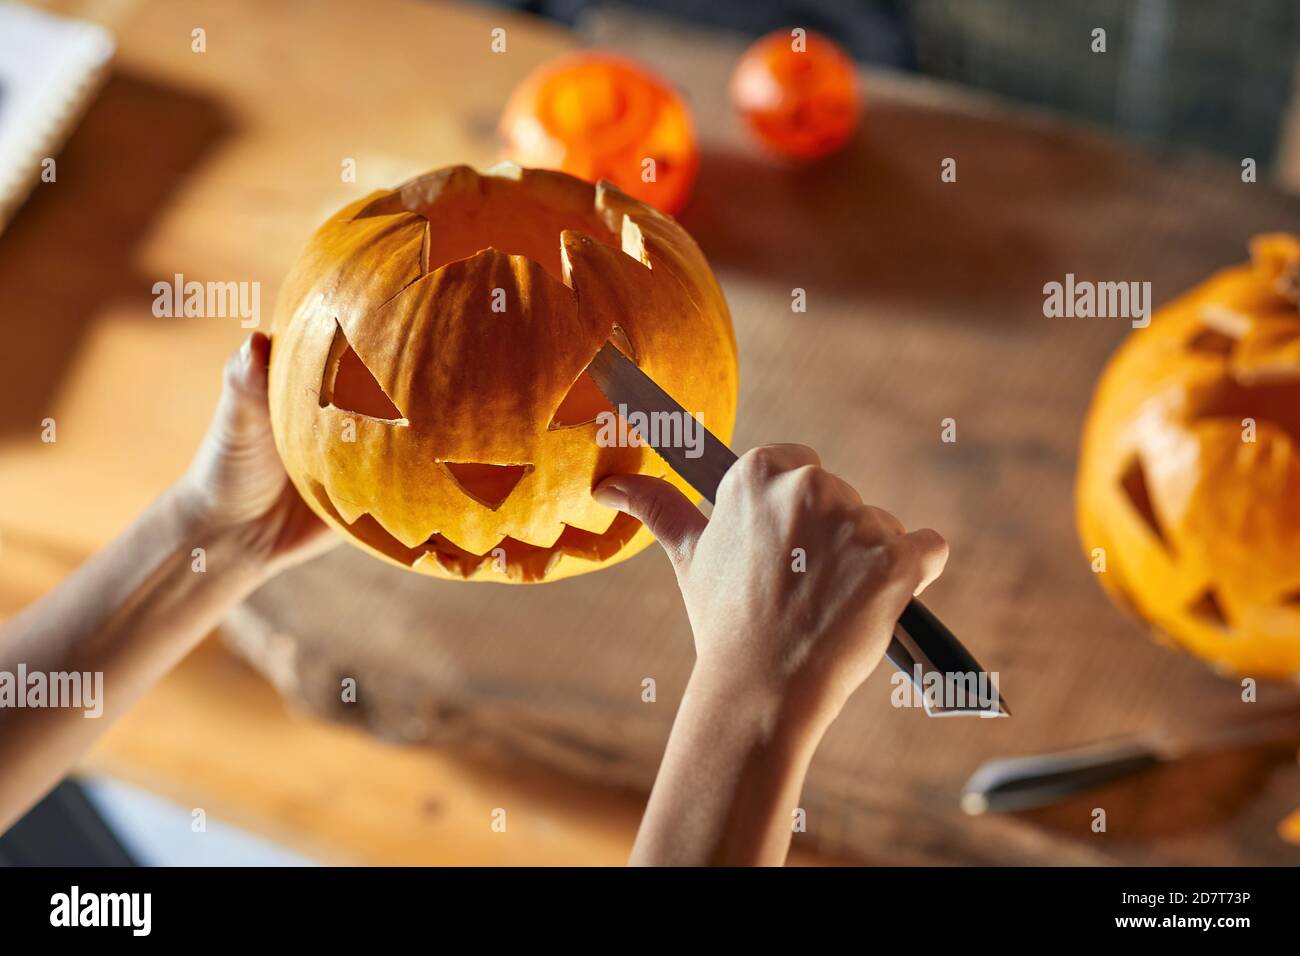 Woman carving Halloween pumpikn at home; Halloween pumpkin with a carved face Stock Photo